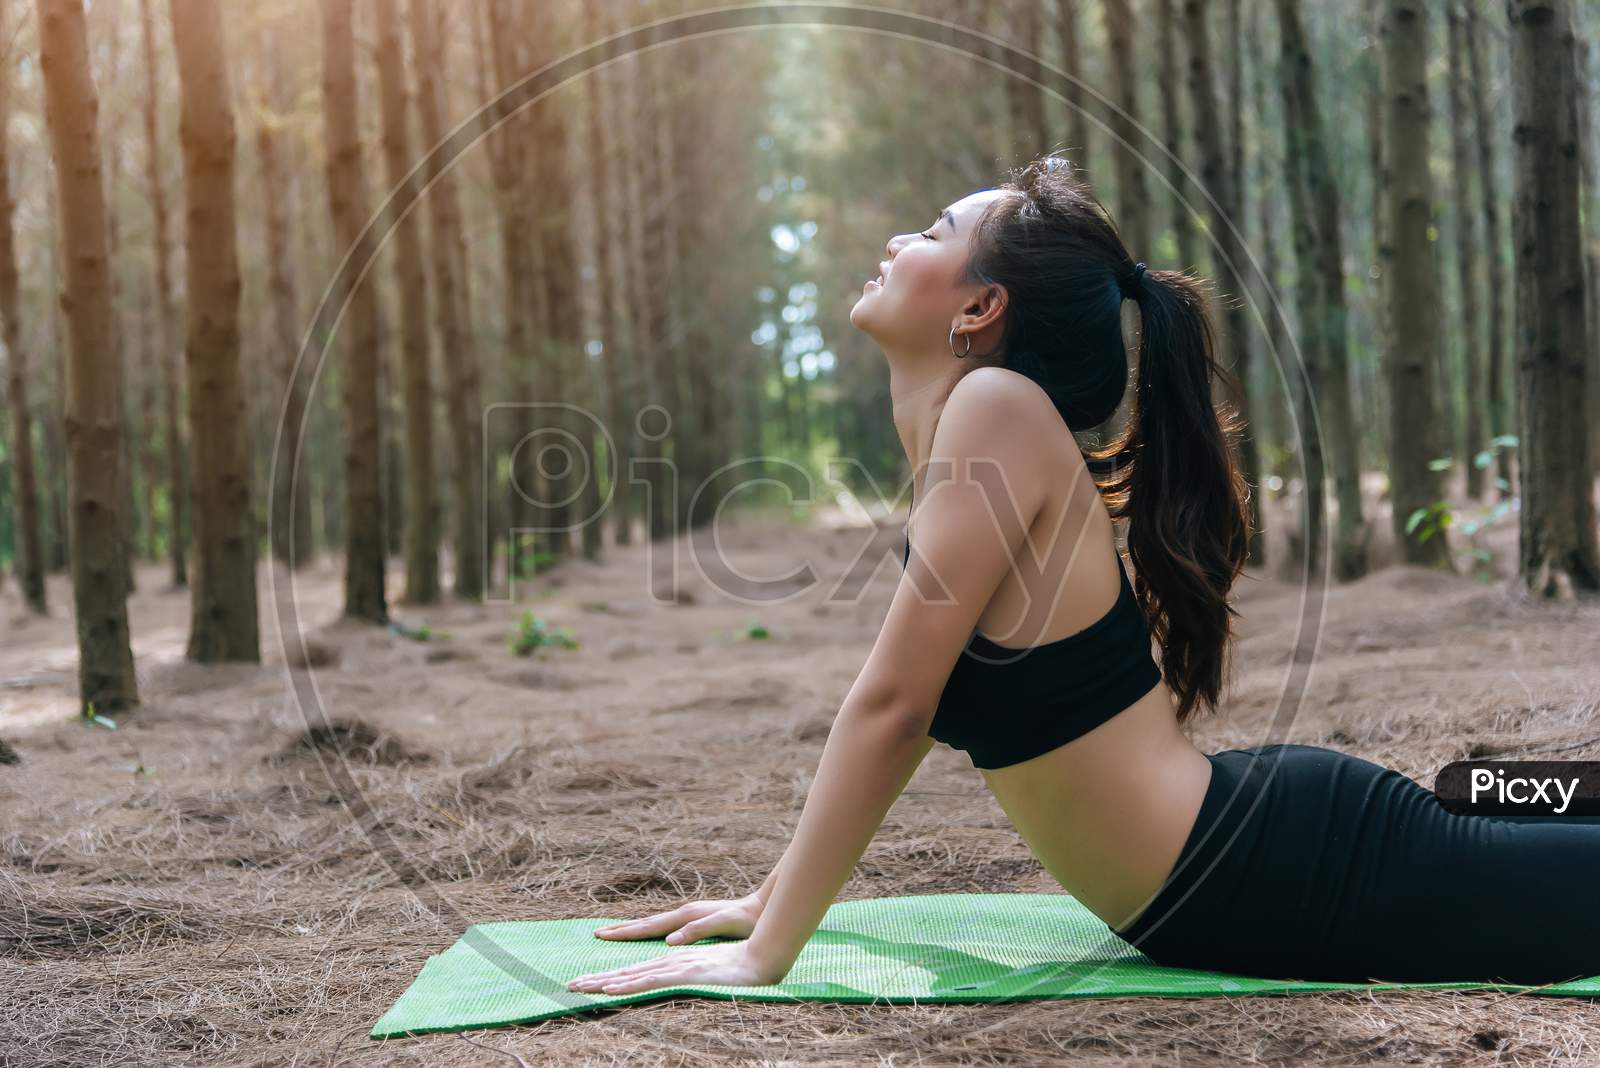 Beautiful Asian Young Woman Doing Yoga And Planking On Green Mat In Forest. Exercise And Meditation Concept. Peaceful And Countryside Concept